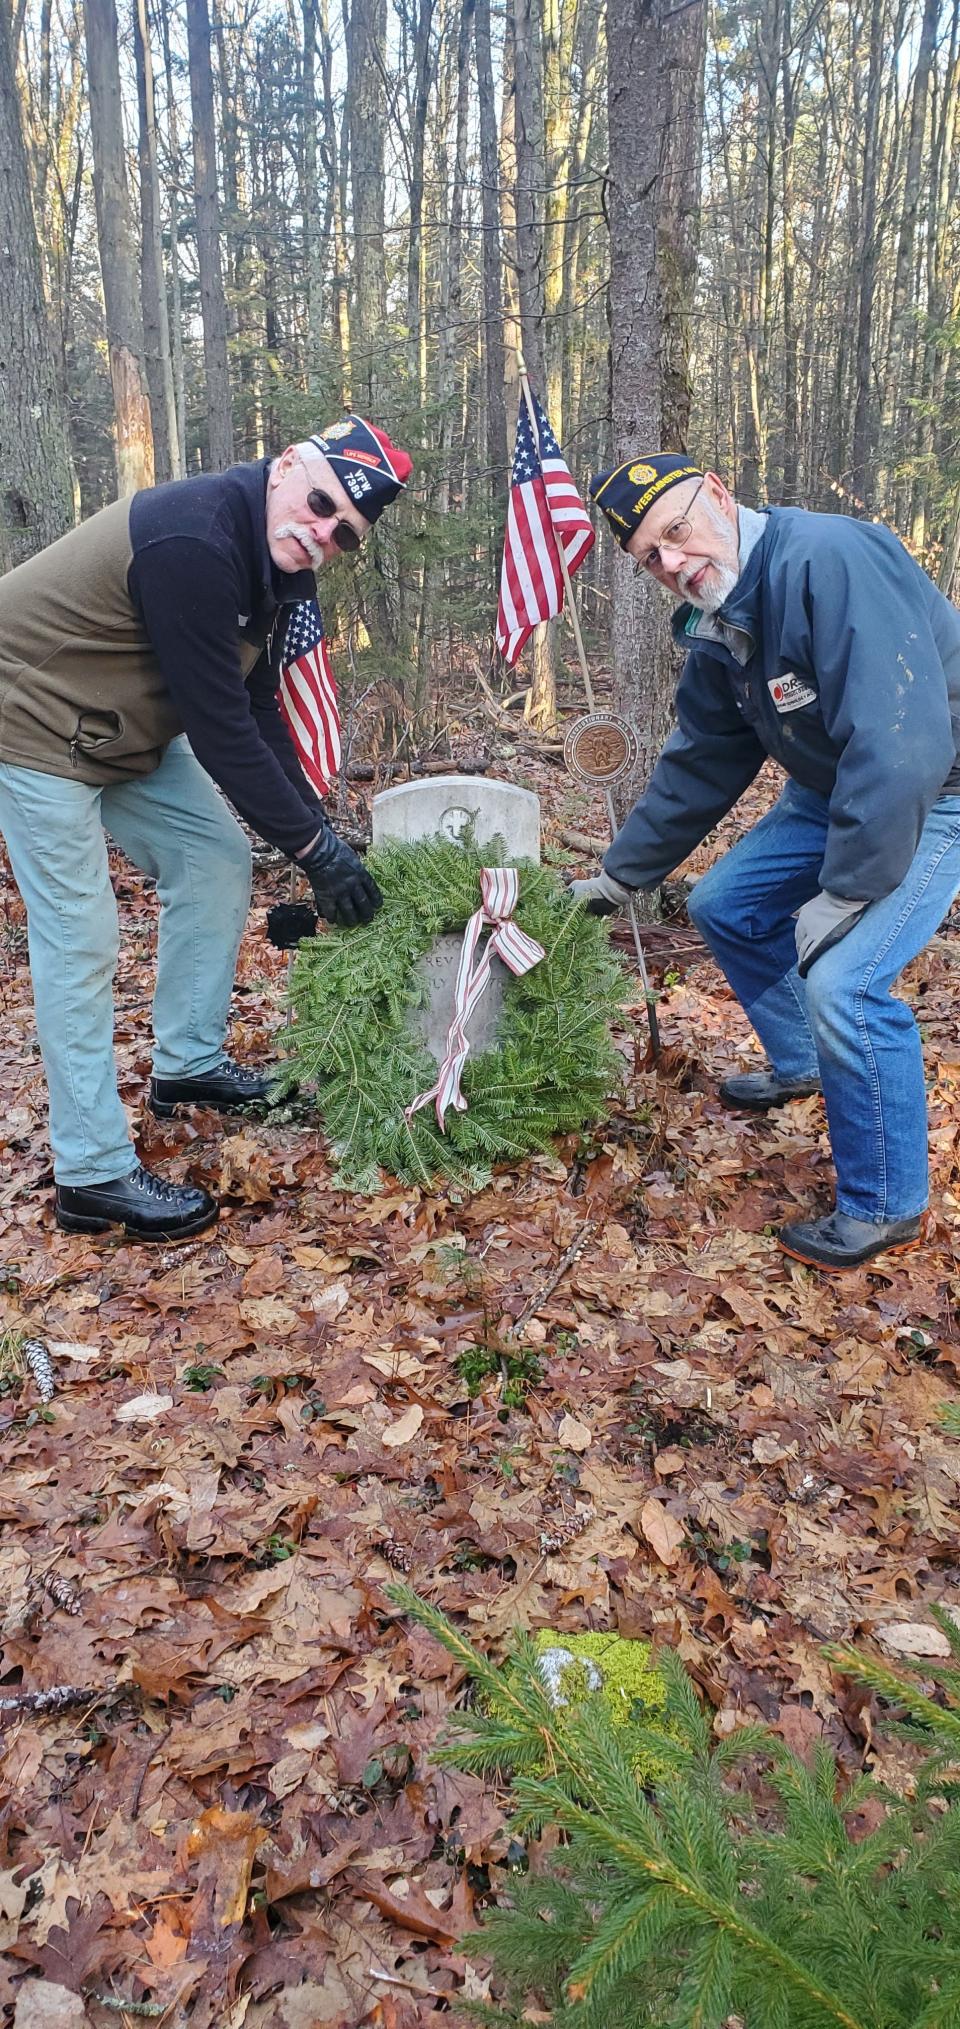 Tom Lehman, commander of the Westminster VFW, left, and Peter Lahtinen, commander of the American Legion in Westminster, place a wreath at the grave of Private Abner Miles last Christmas.